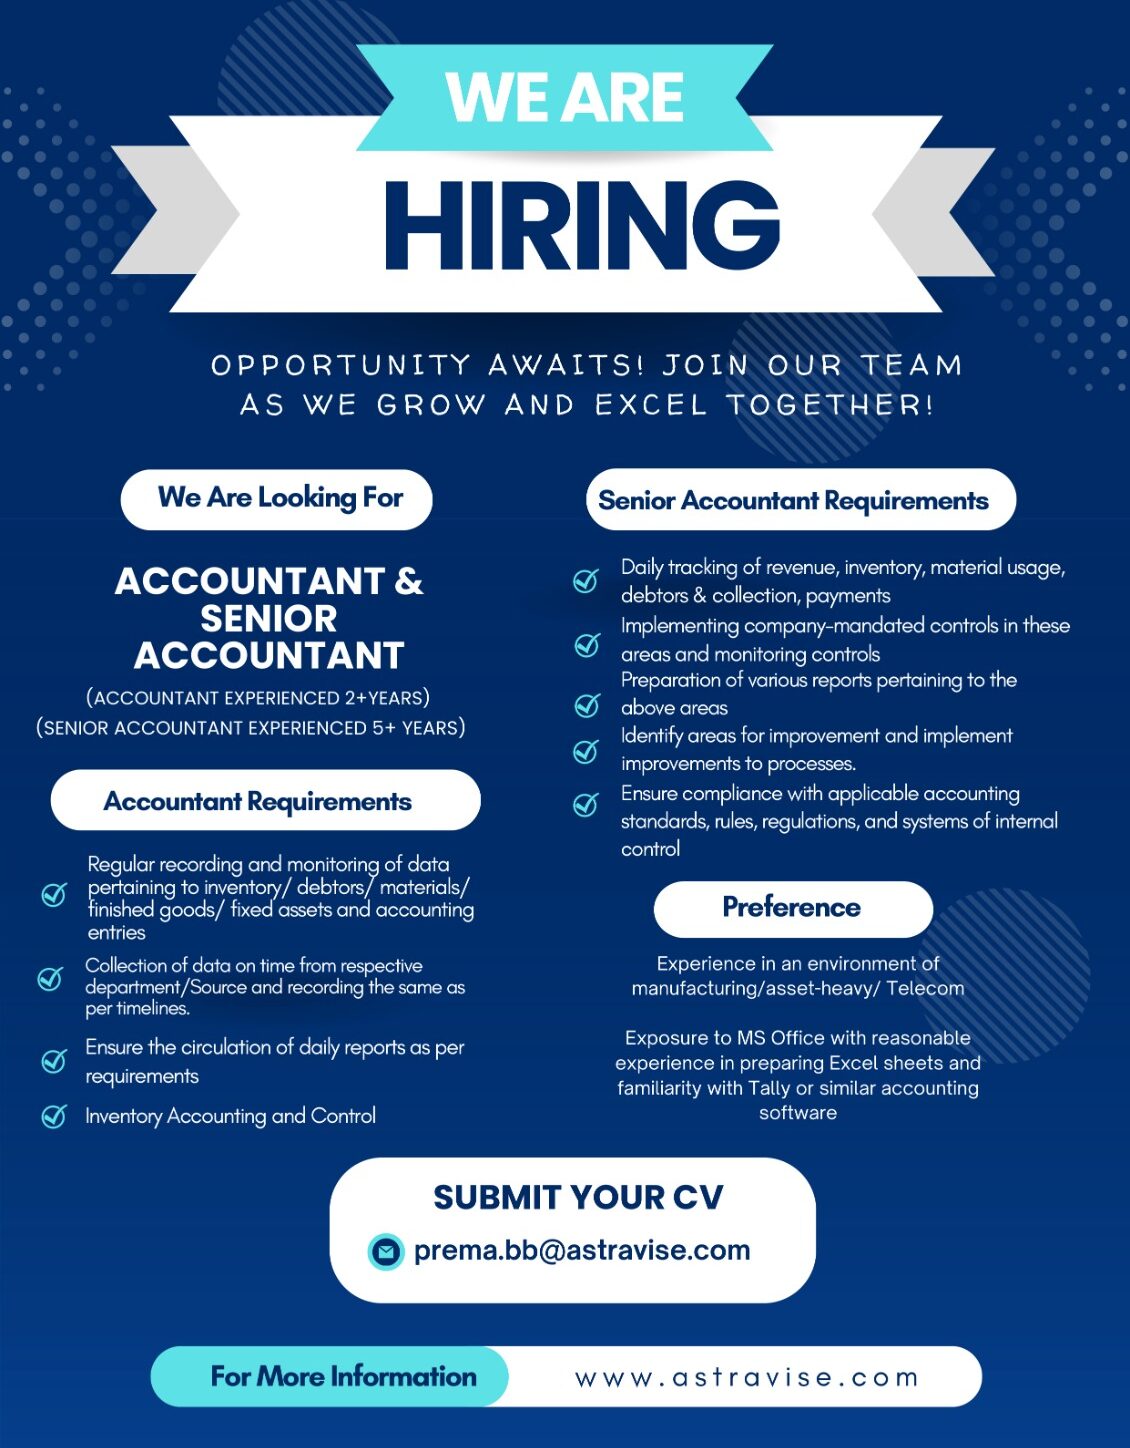 We're Hiring Accountant and Senior Accountant in Bangalore for Astravise